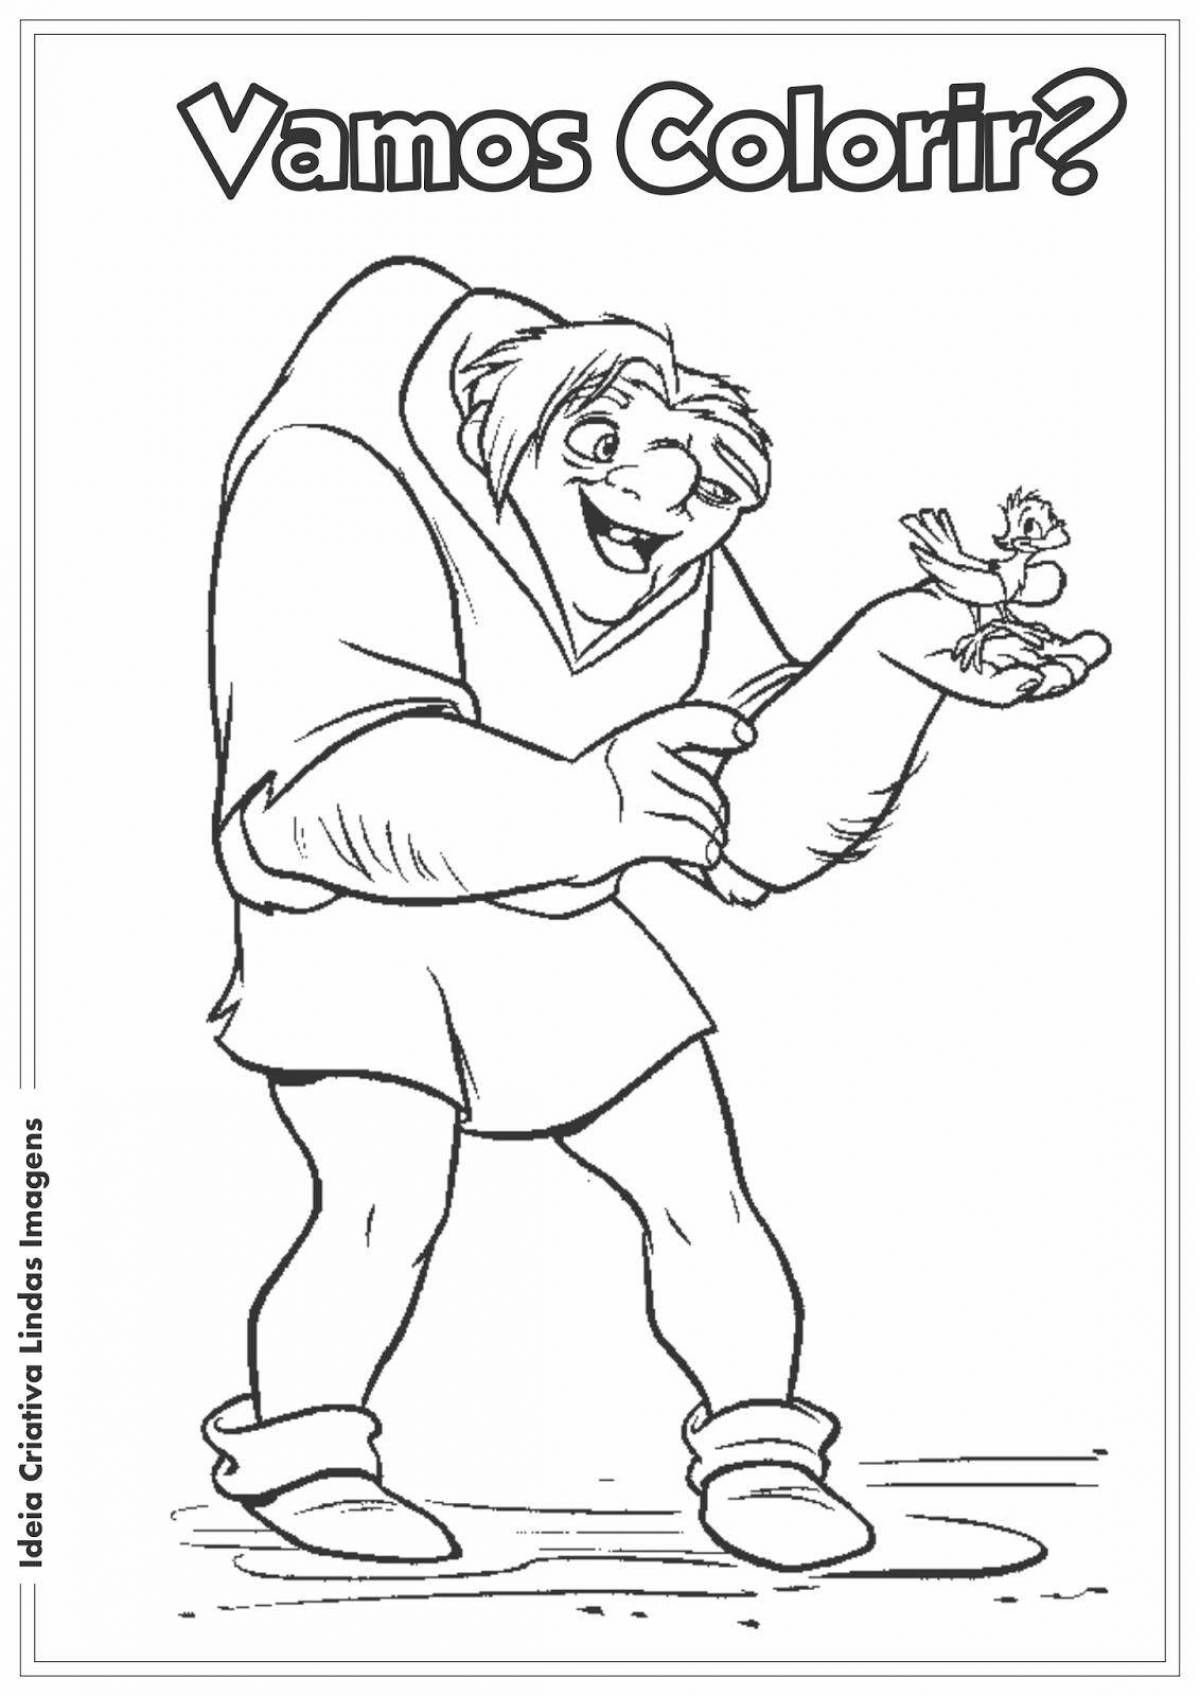 Coloring page grinning boy